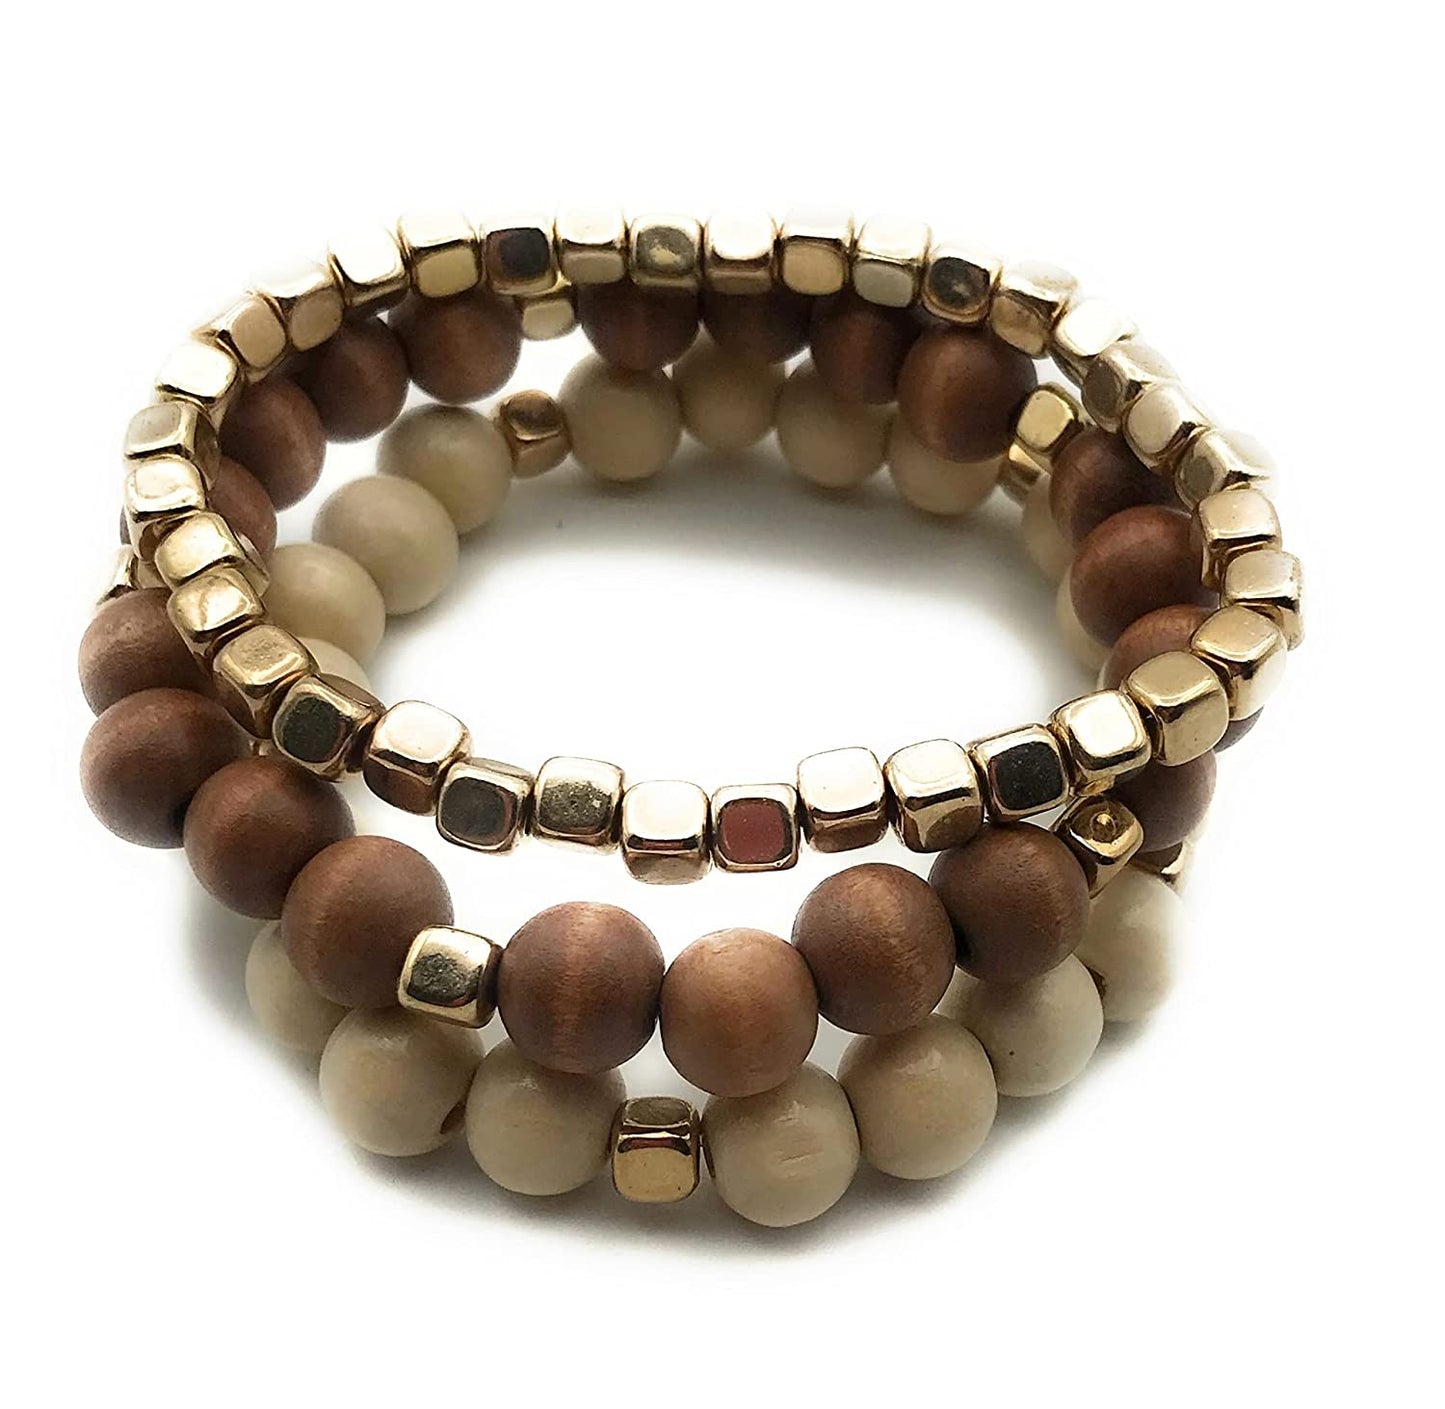 Set of Gold and Wooden Bead Bracelets in a Stack by Scott D Jewelry Designs